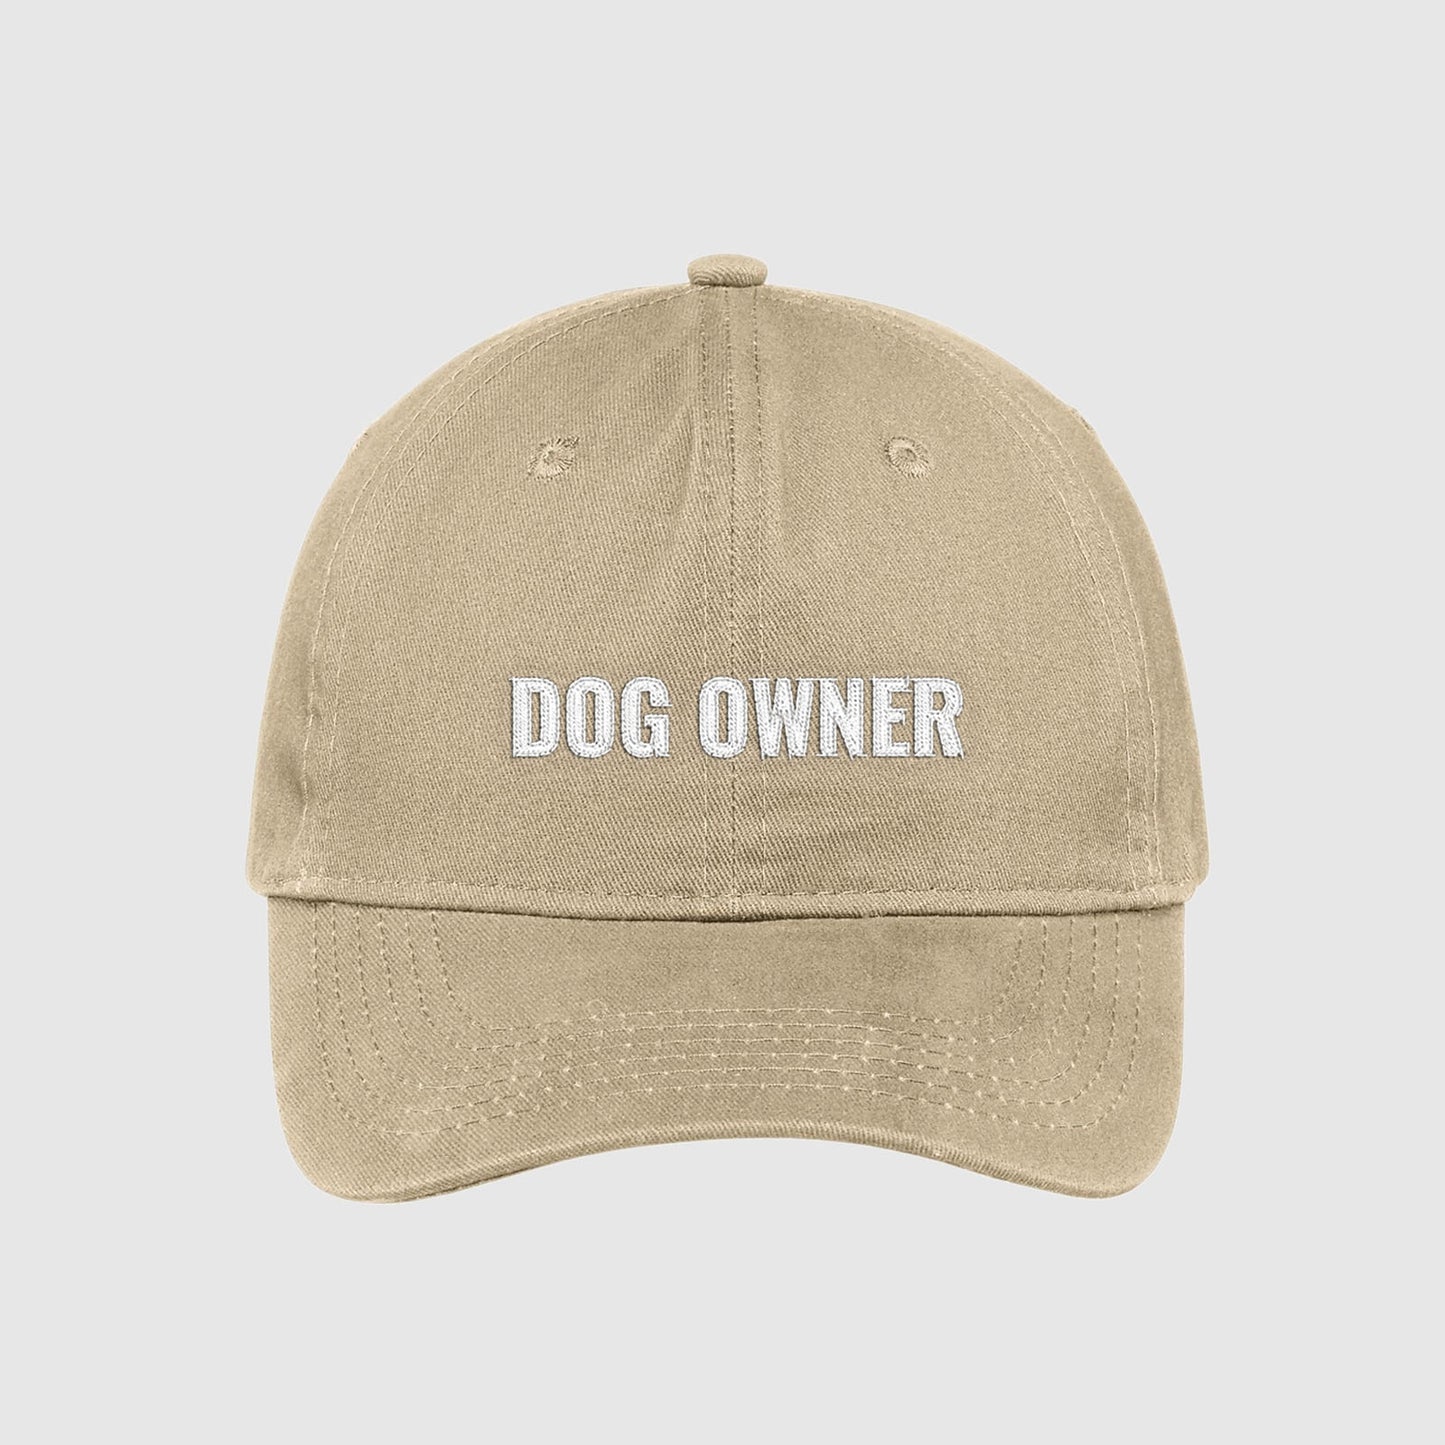 Khaki dad hat with Dog Owner embroidered on the front with white thread.